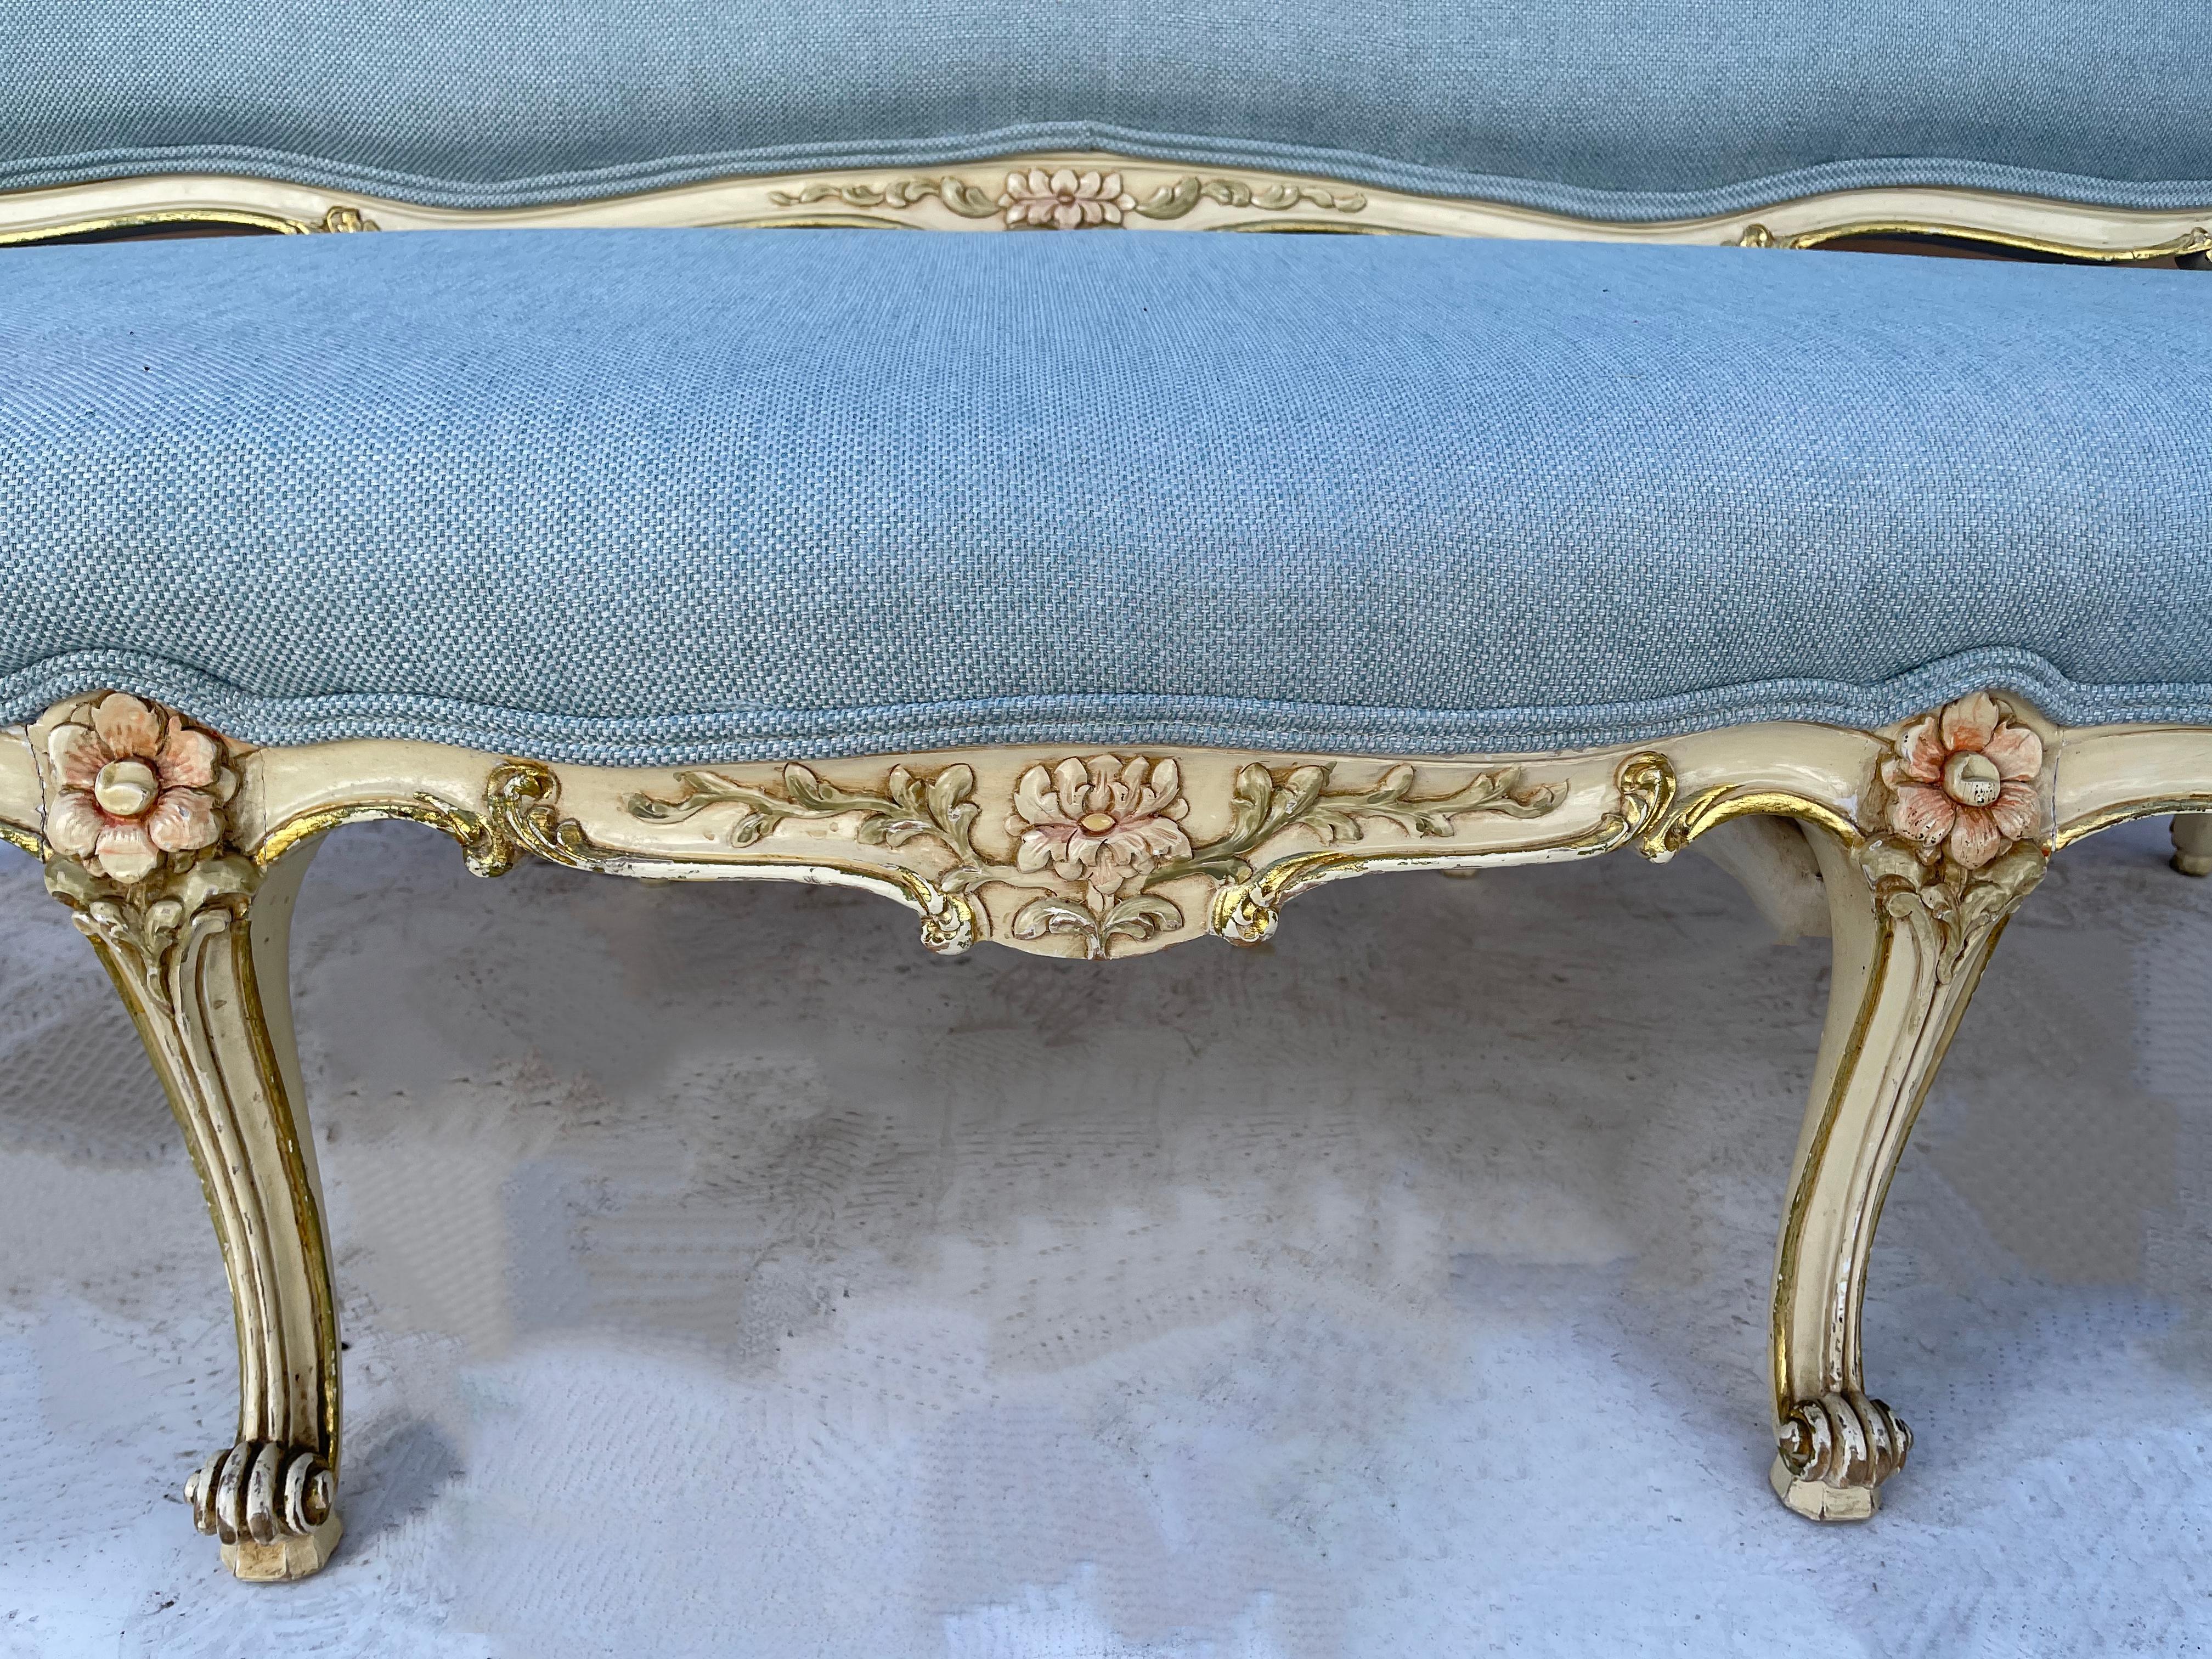 1950s French Style Carved and Painted Settee or Sofa in Blue Linen In Good Condition For Sale In Kennesaw, GA